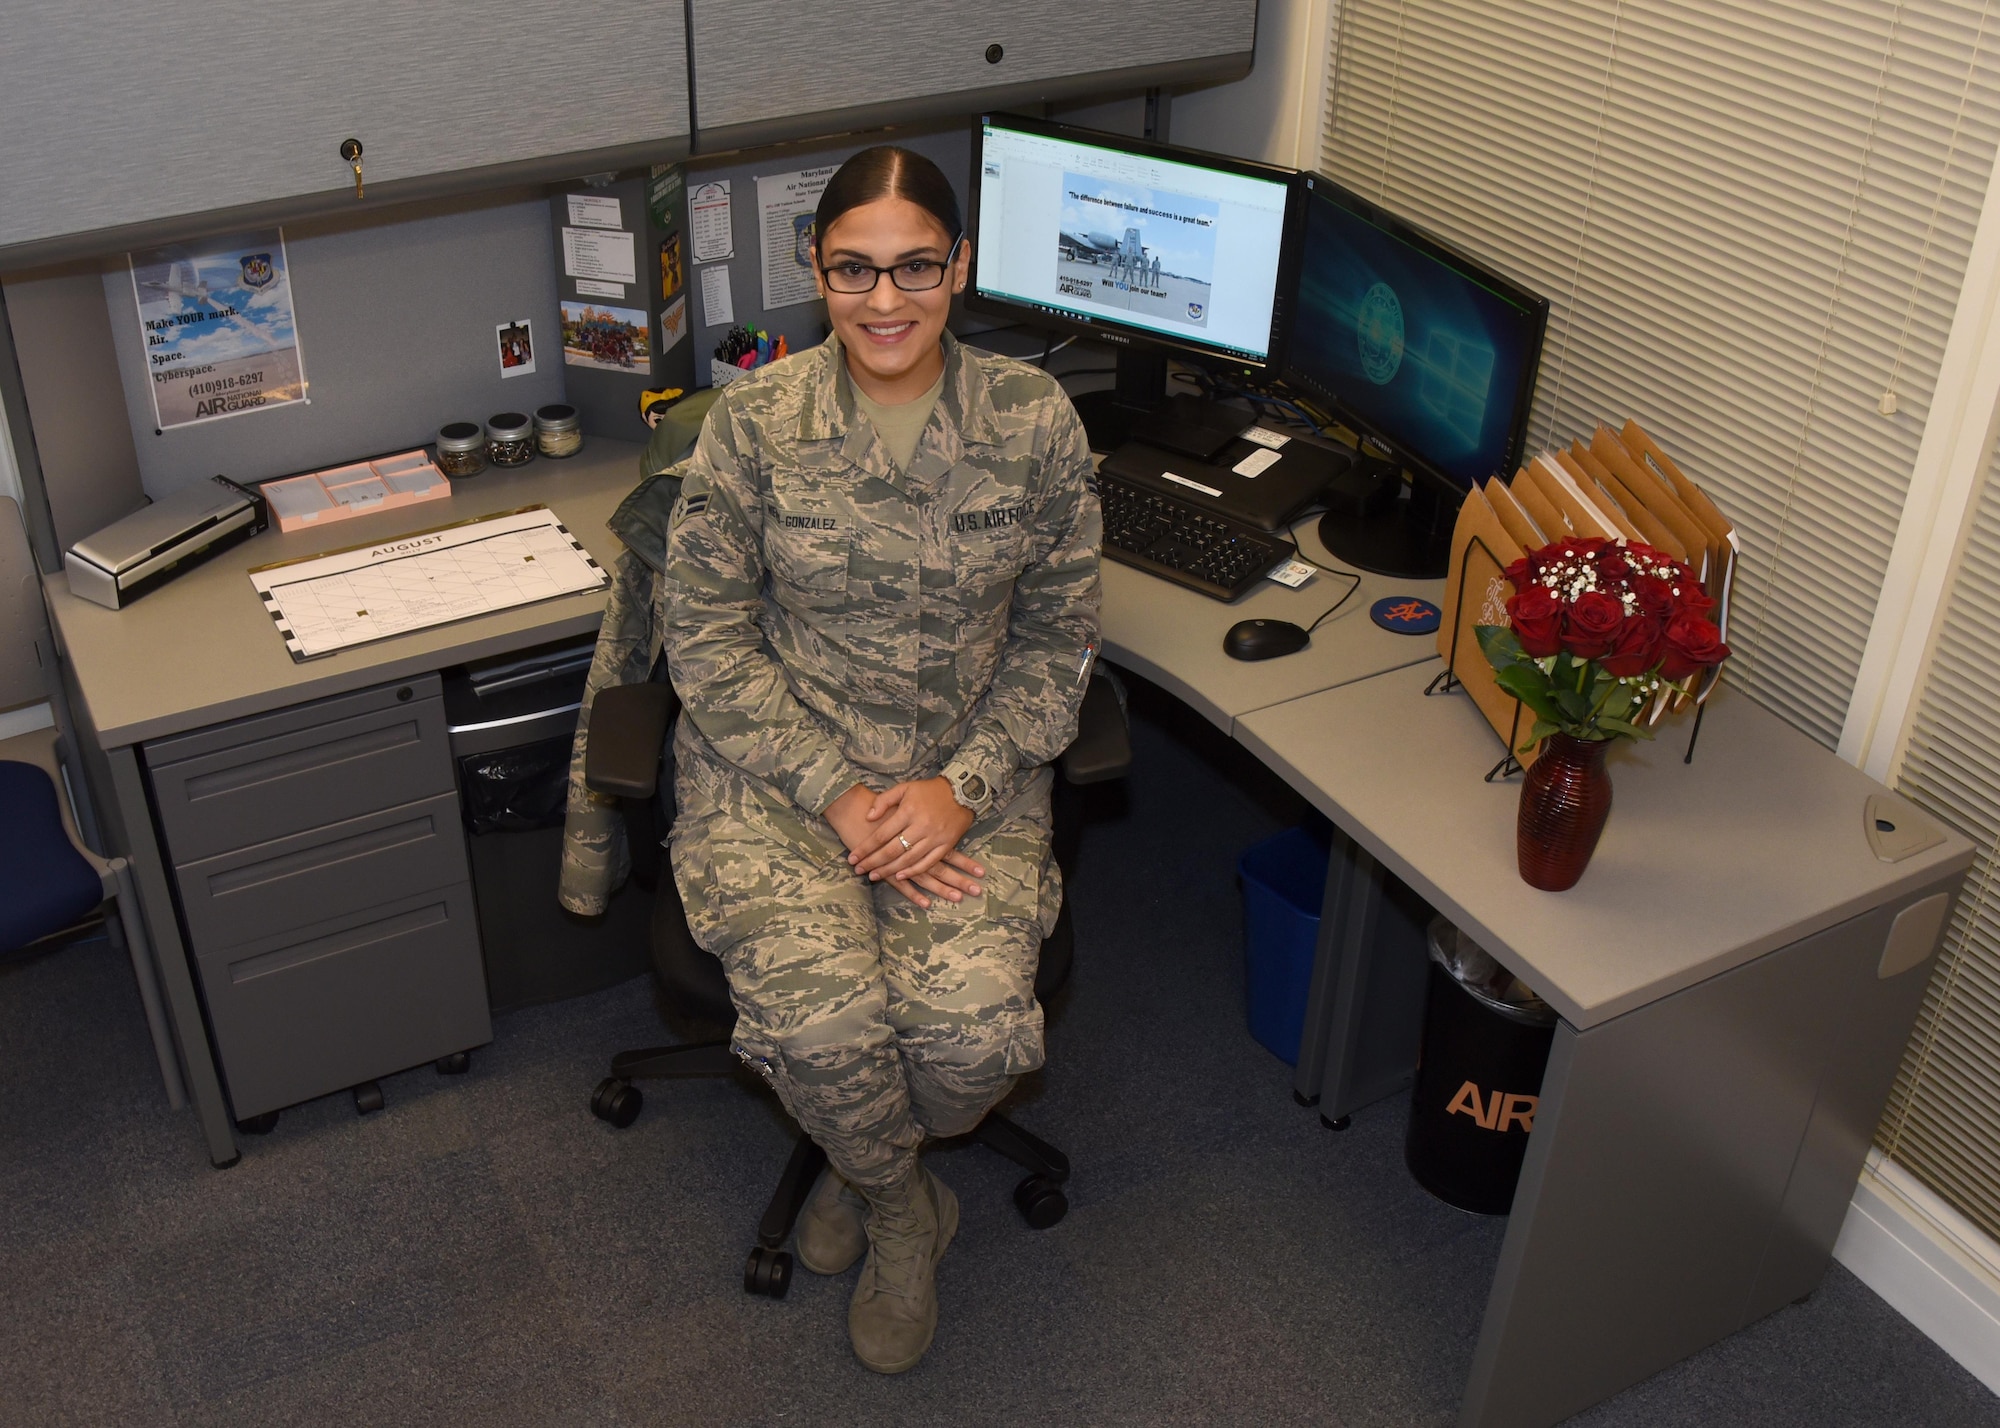 Airman 1st Class Natalie Nieves-Gonzalez poses for a photo at her desk in the retention office Aug. 31, 2017 at Warfield Air National Guard Base, Middle River, Md. Nieves-Gonzalez has worked as the recruiting and retention administrator for about a year. (U.S Air National Guard photo by Senior Airman Enjoli Saunders)